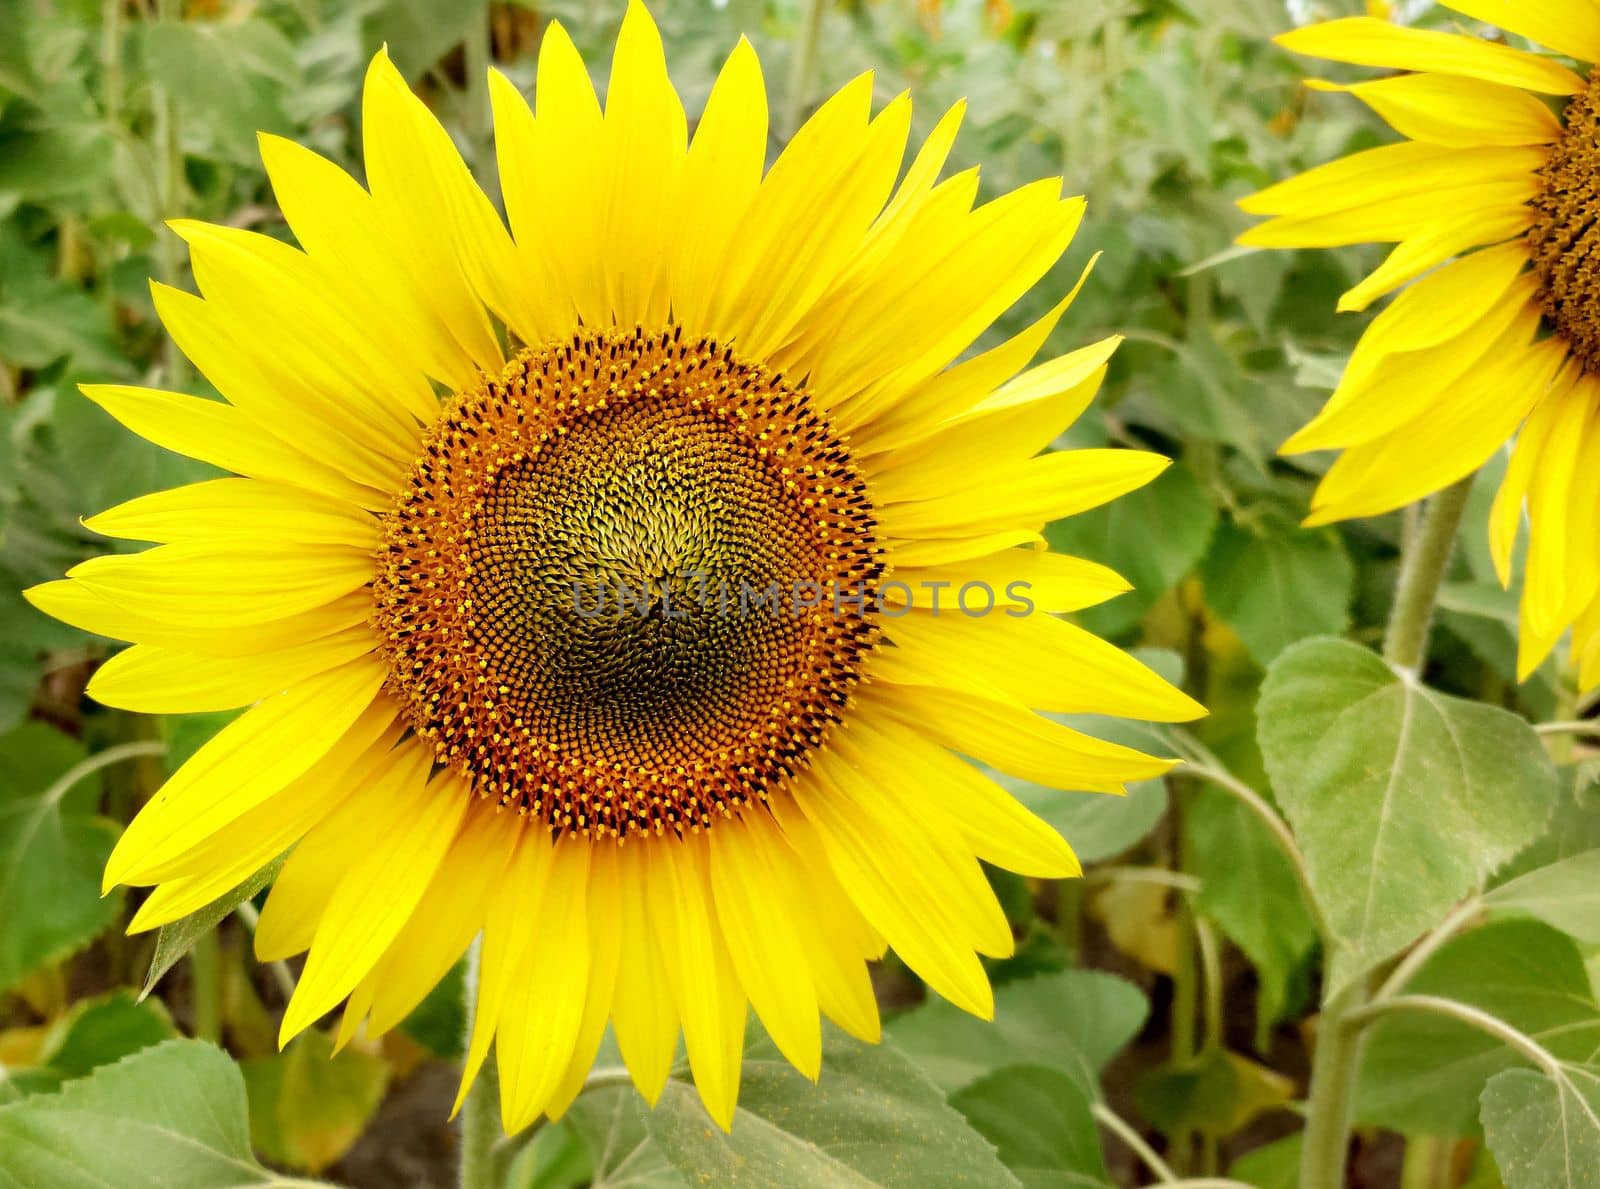 Bright yellow sunflowers in full bloom on a cloudy day.Texture or background.